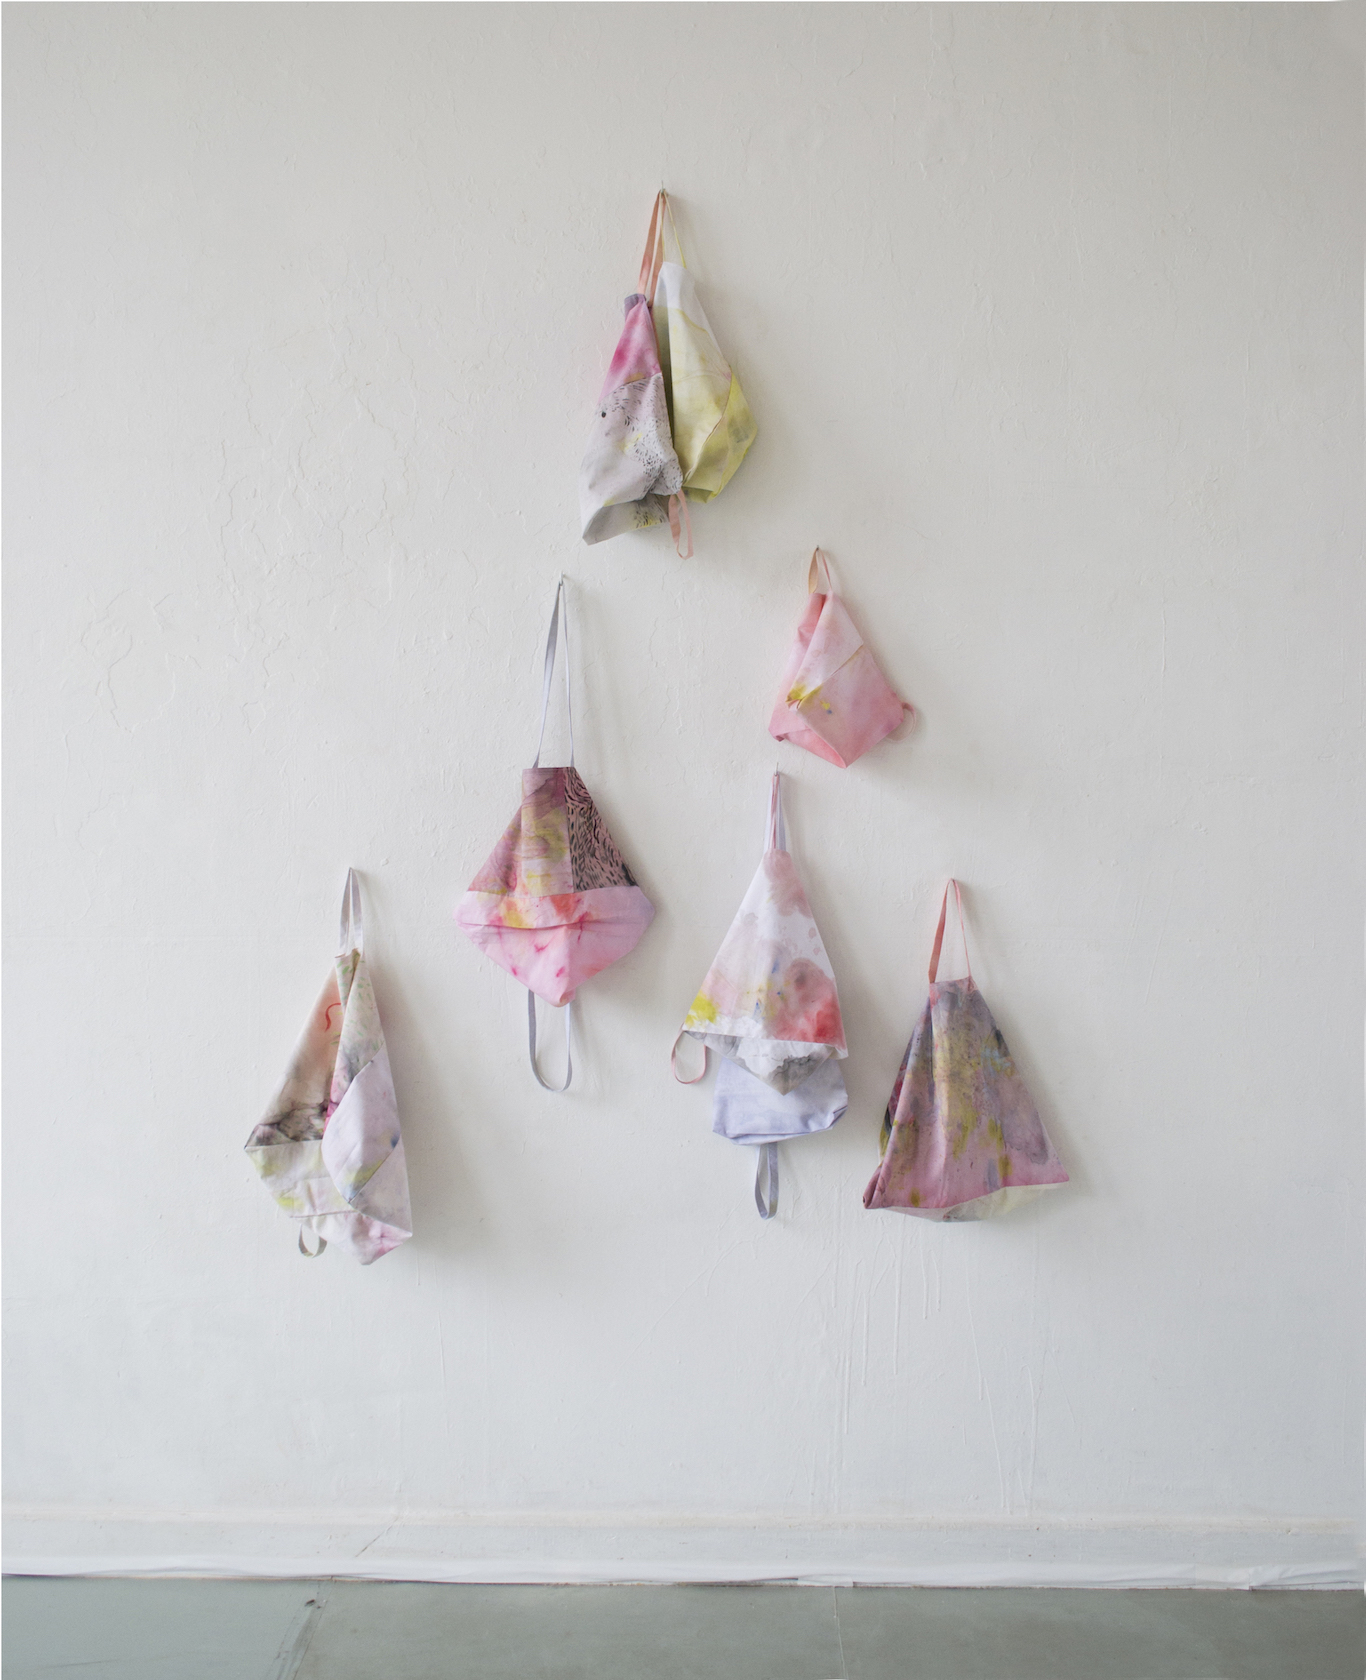 Seven fabric tote bag like forms are installed in a triangle shape on a white wall. The fabric is painted a range of pinks and pastel colours.